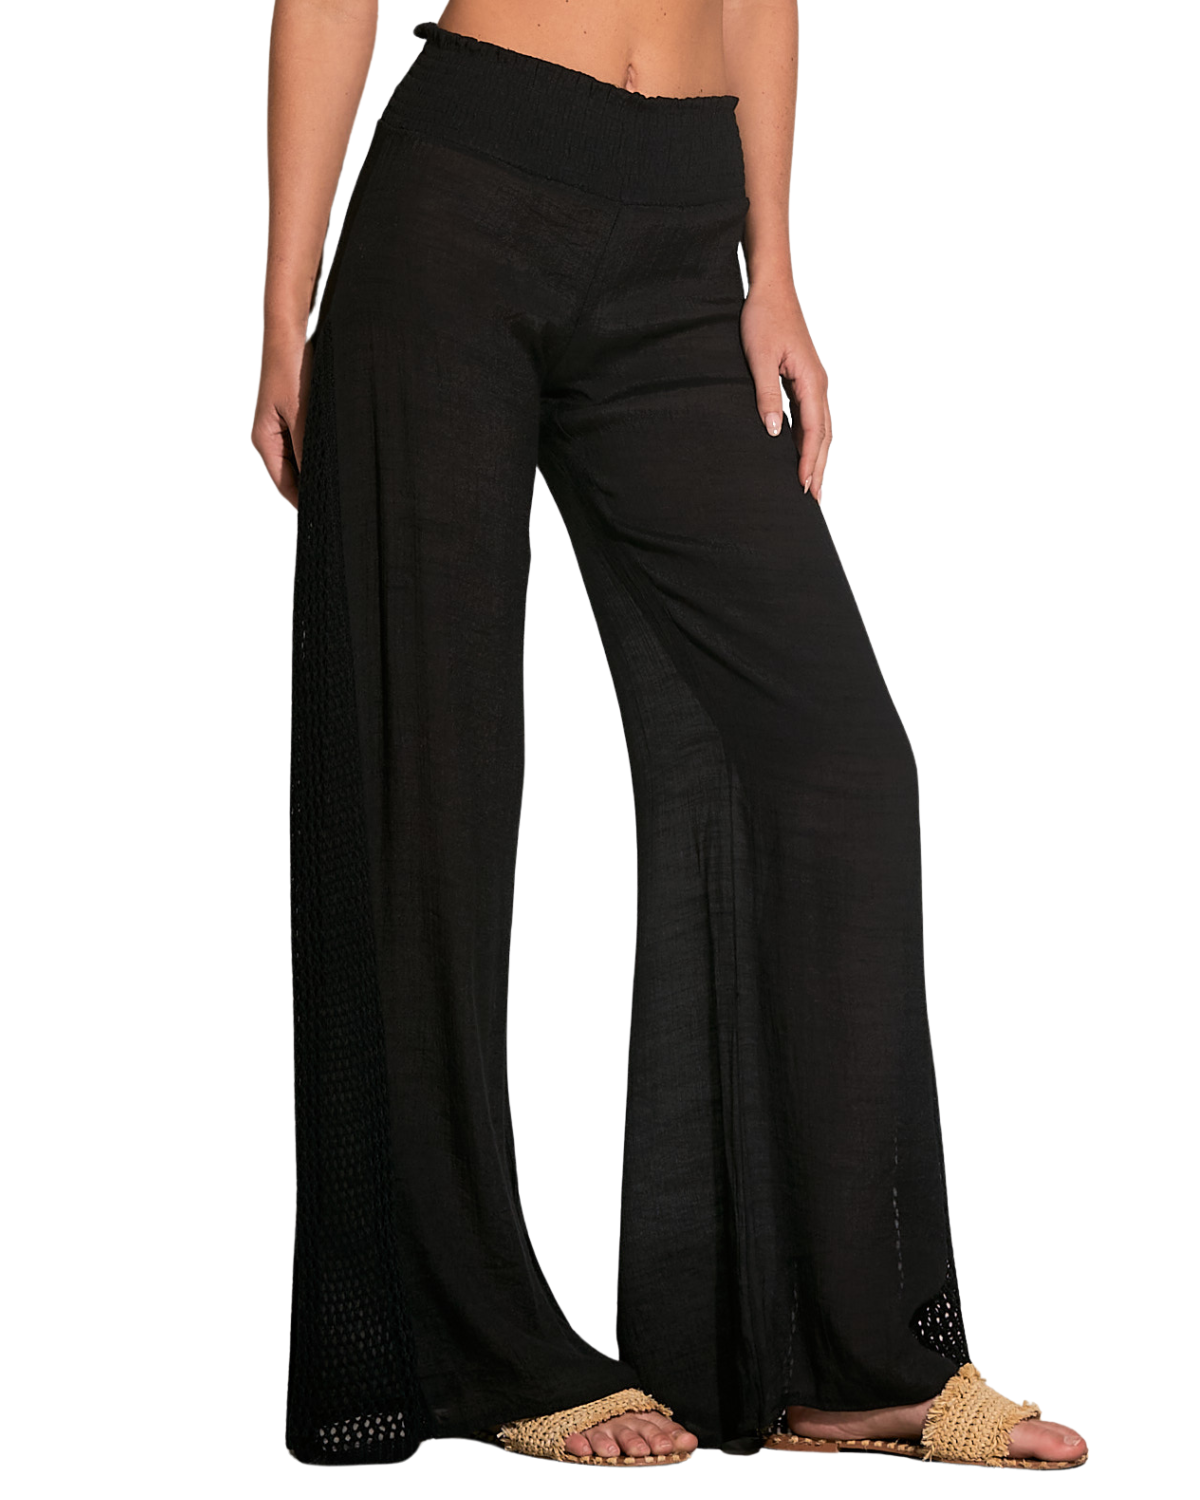 Model wearing a cover up pant with crochet side detail in black